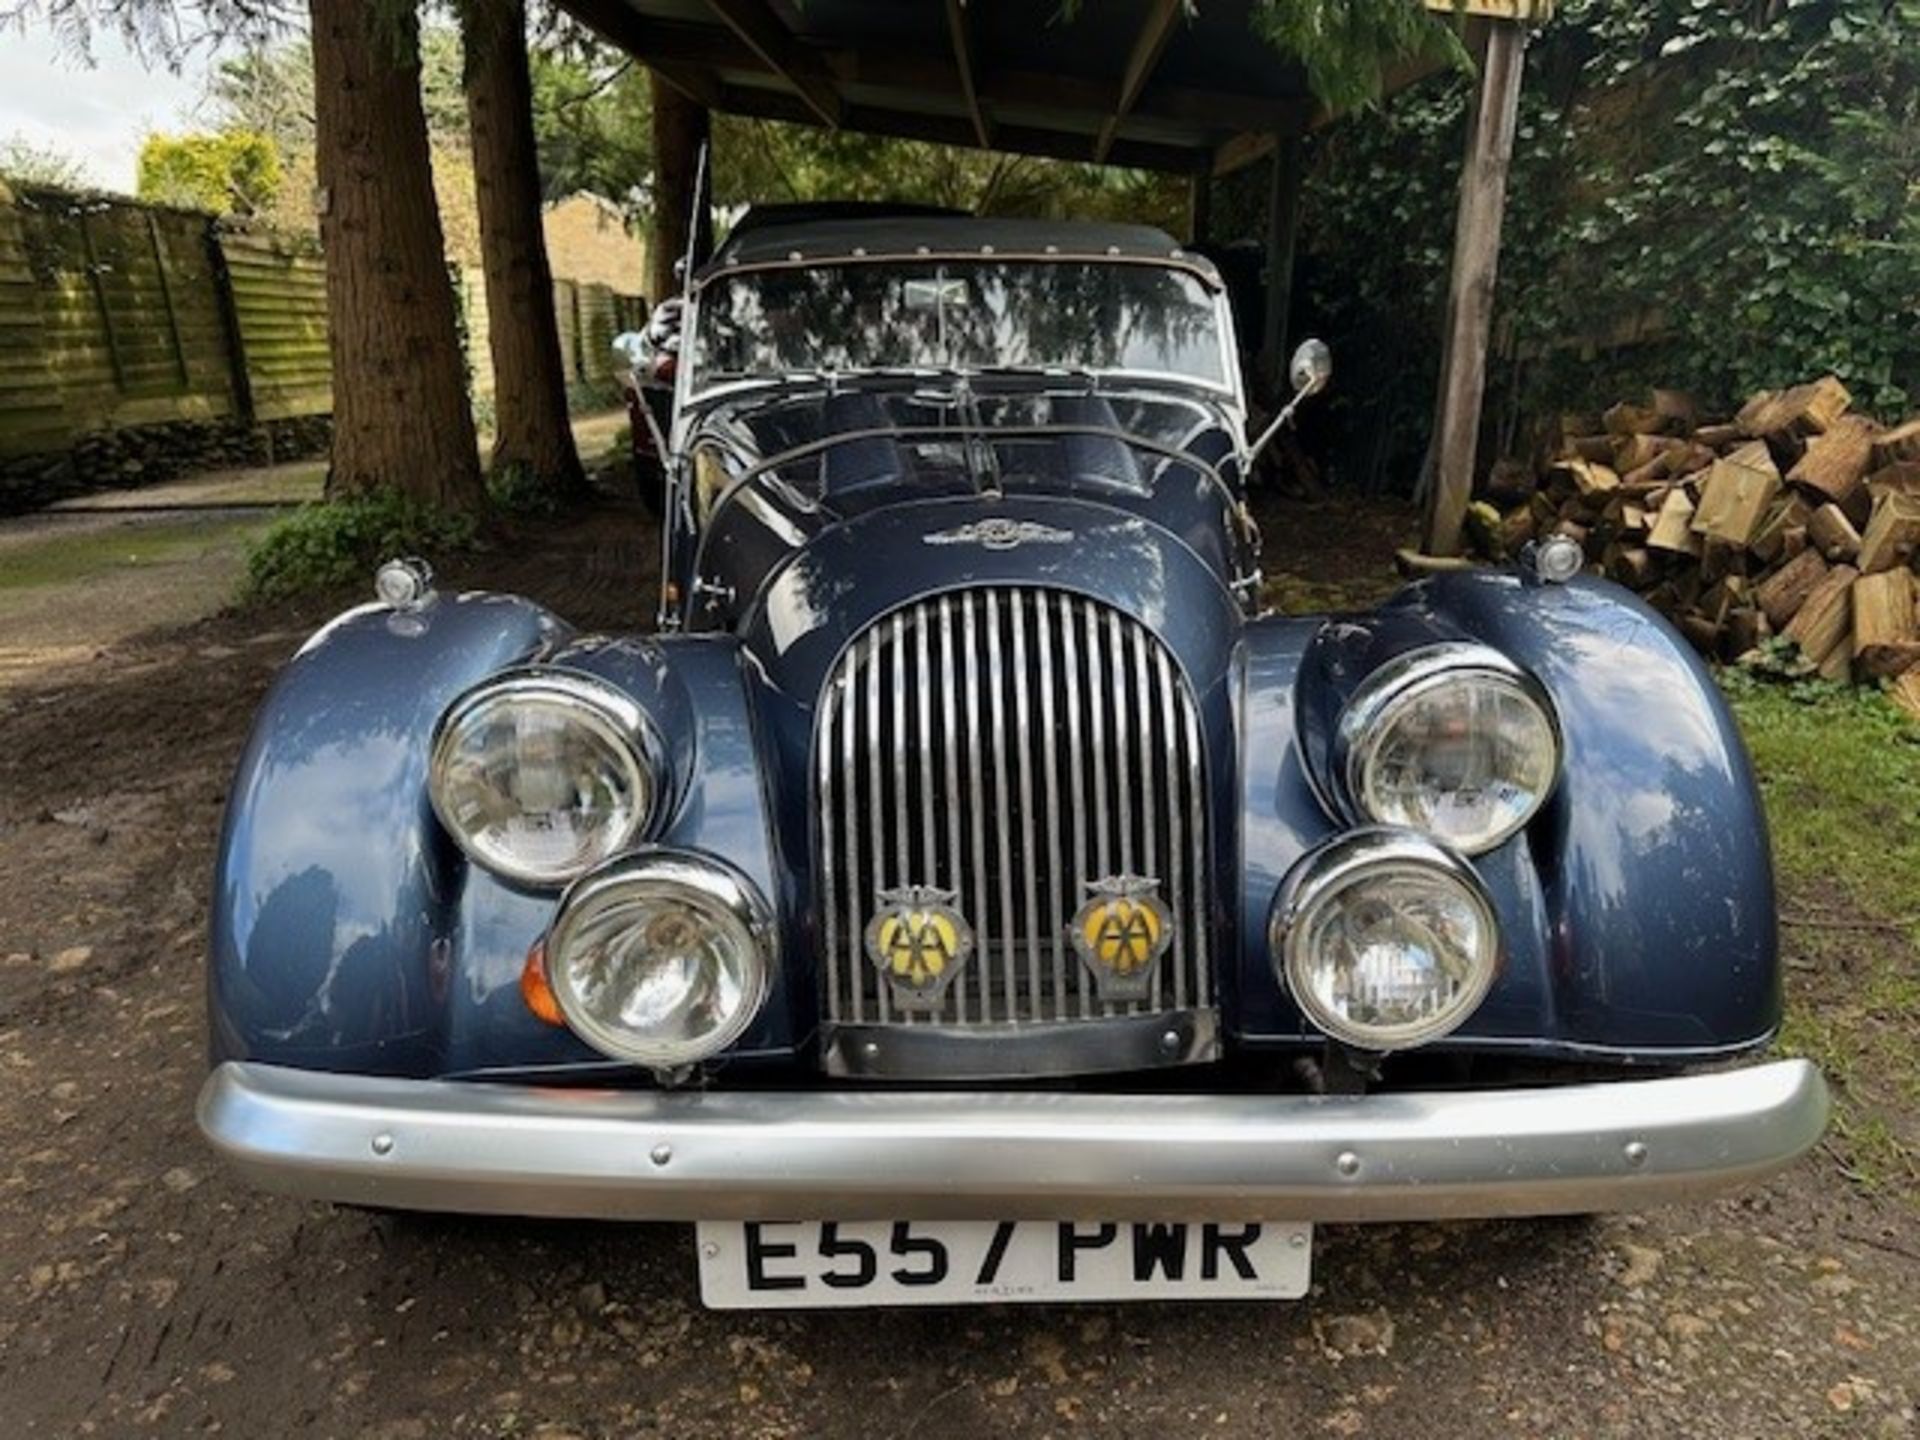 1987 Morgan 4/4 Sports Registration number E557 PWR Chassis number C7463 Engine number 87E28B- - Image 17 of 43